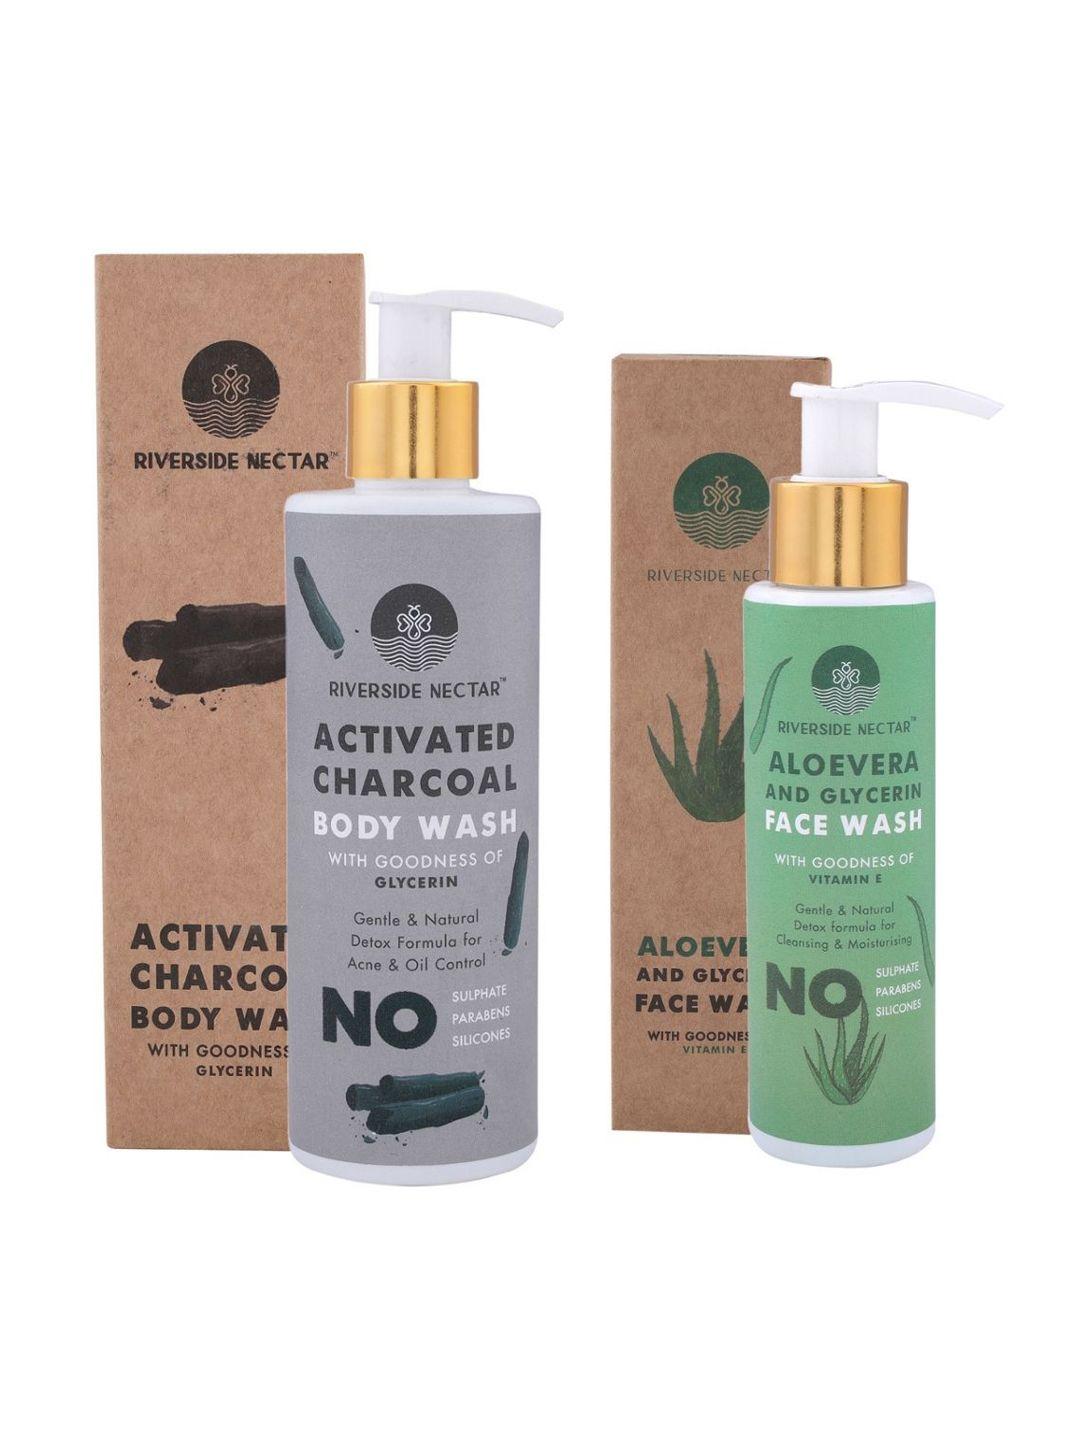 riverside nectar set of activated charcoal body wash & aloe vera glycerin face wash